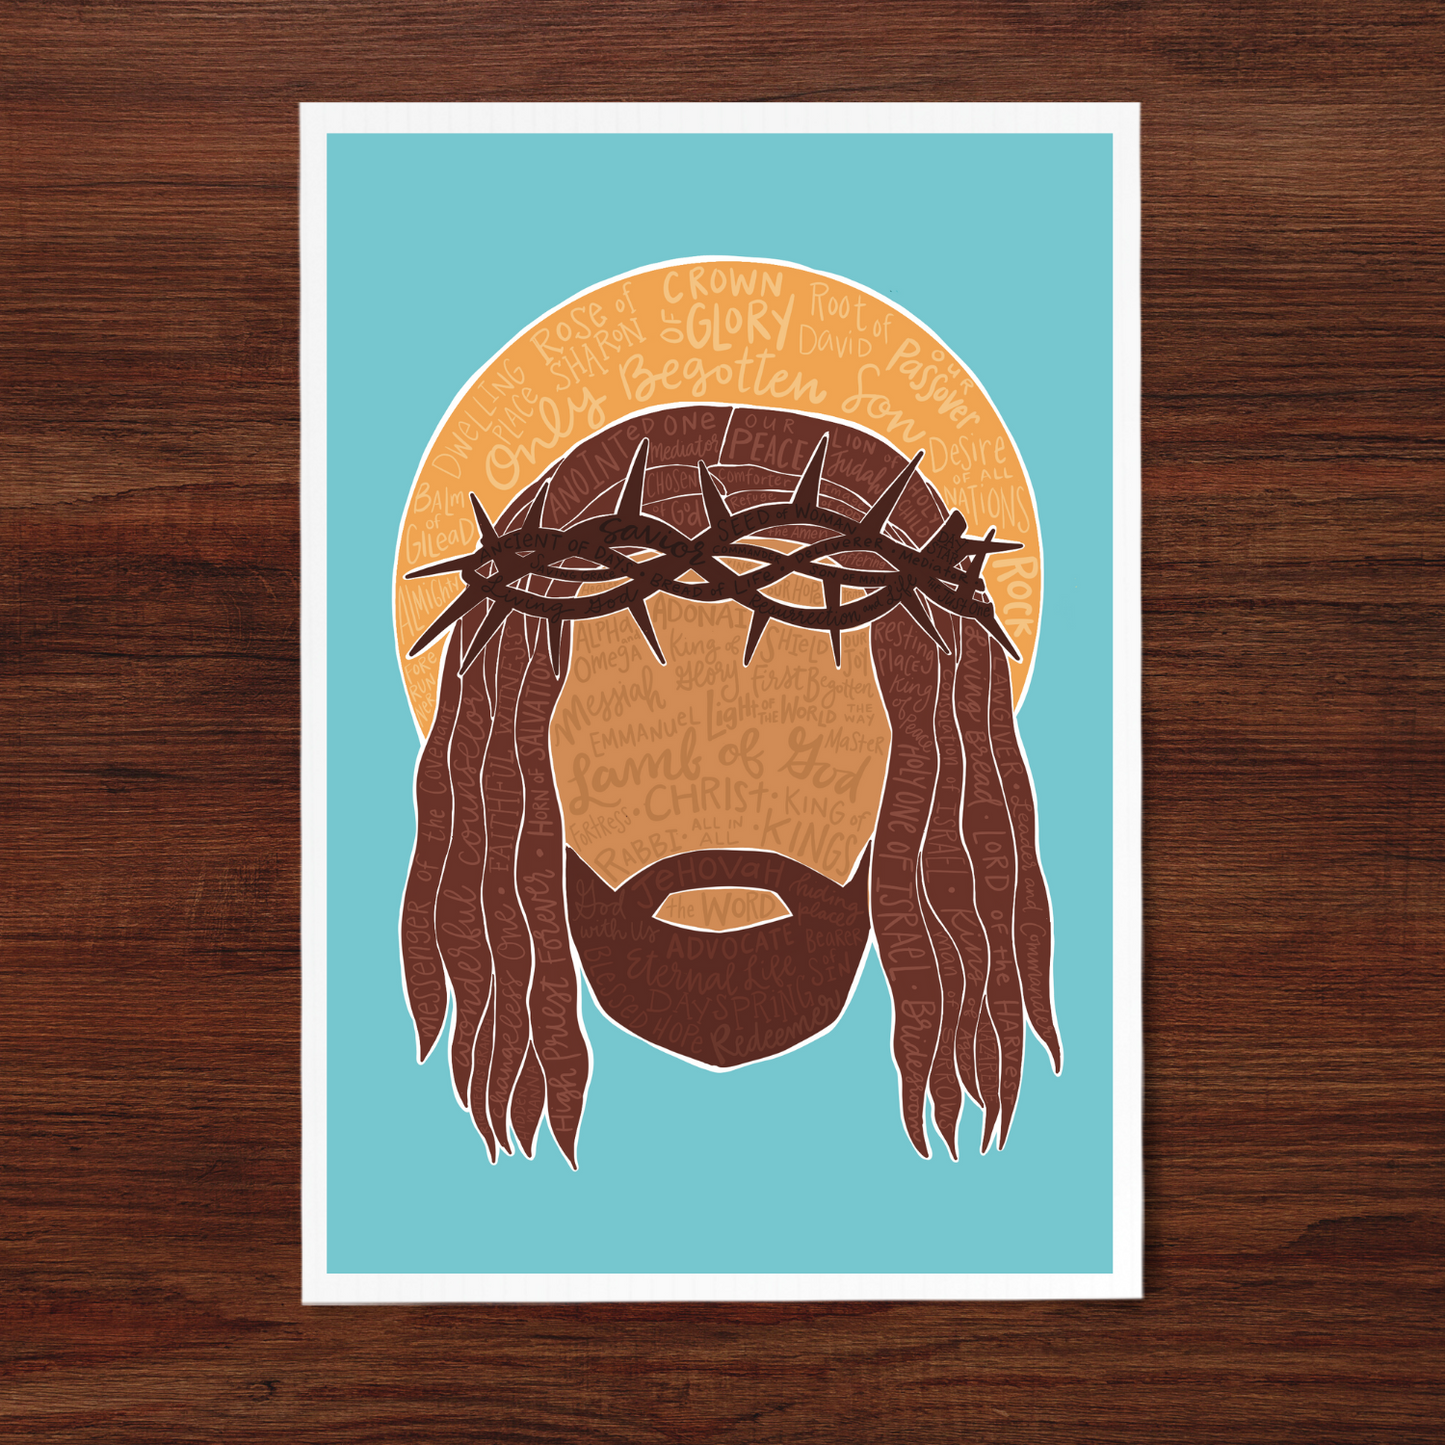 The Most Holy Name of Jesus - 5x7 Art Print